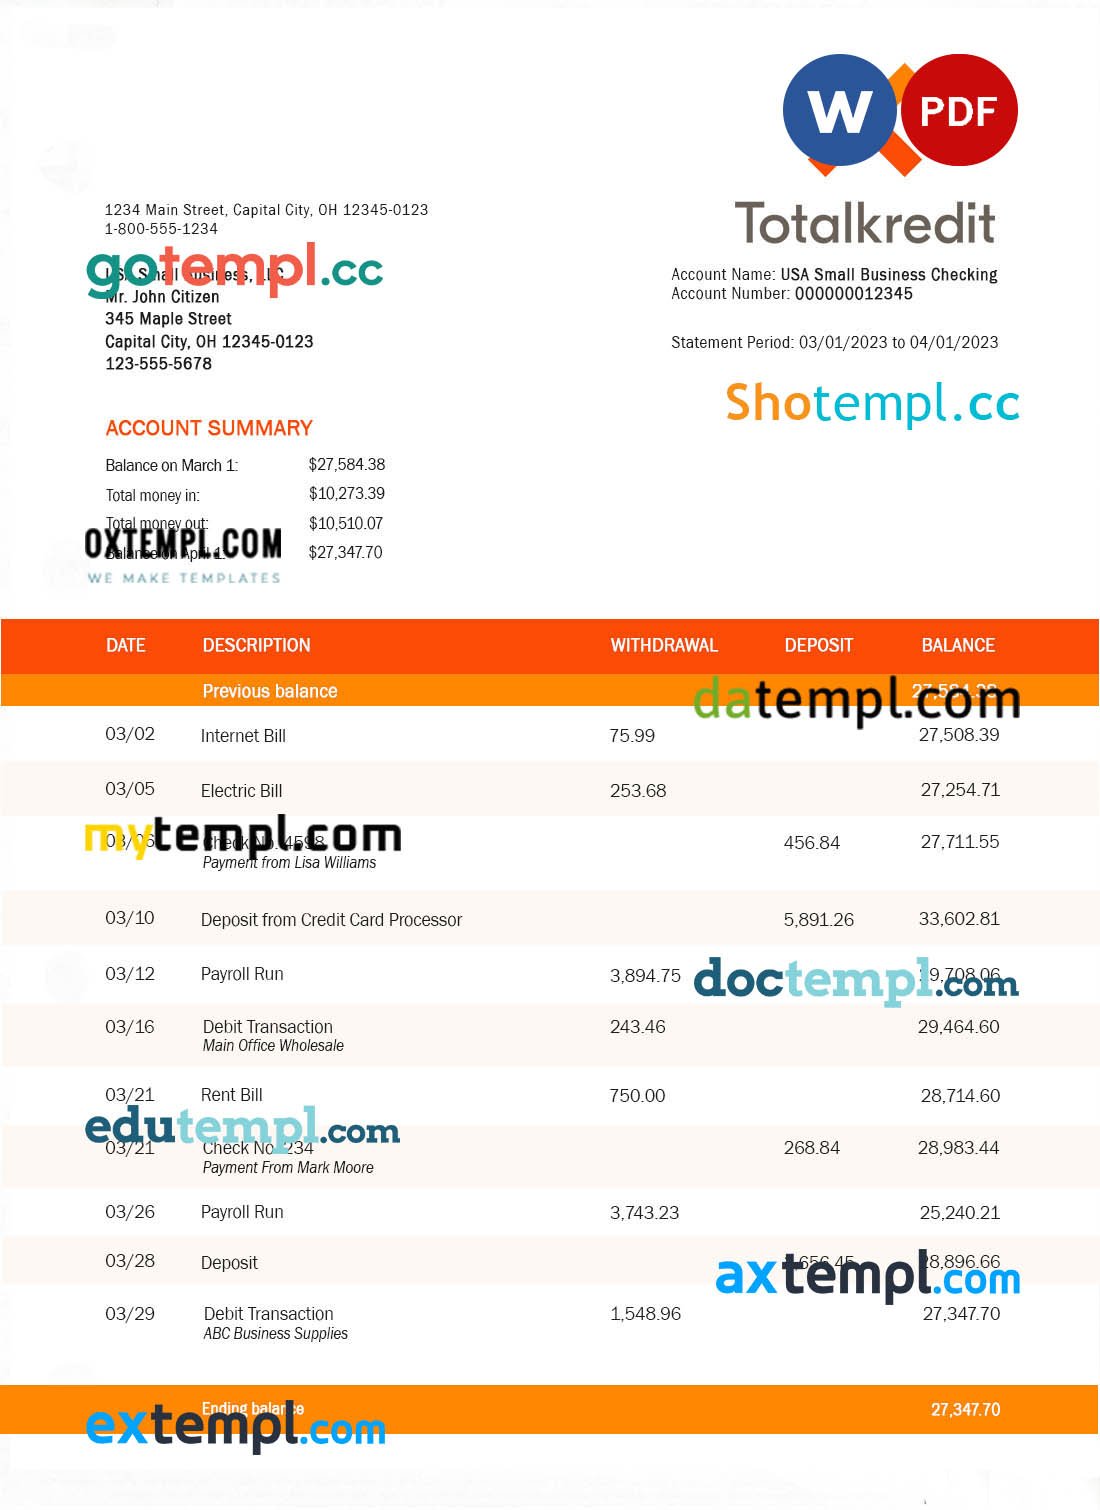 TOTALKREDIT Bank organization account statement Word and PDF template